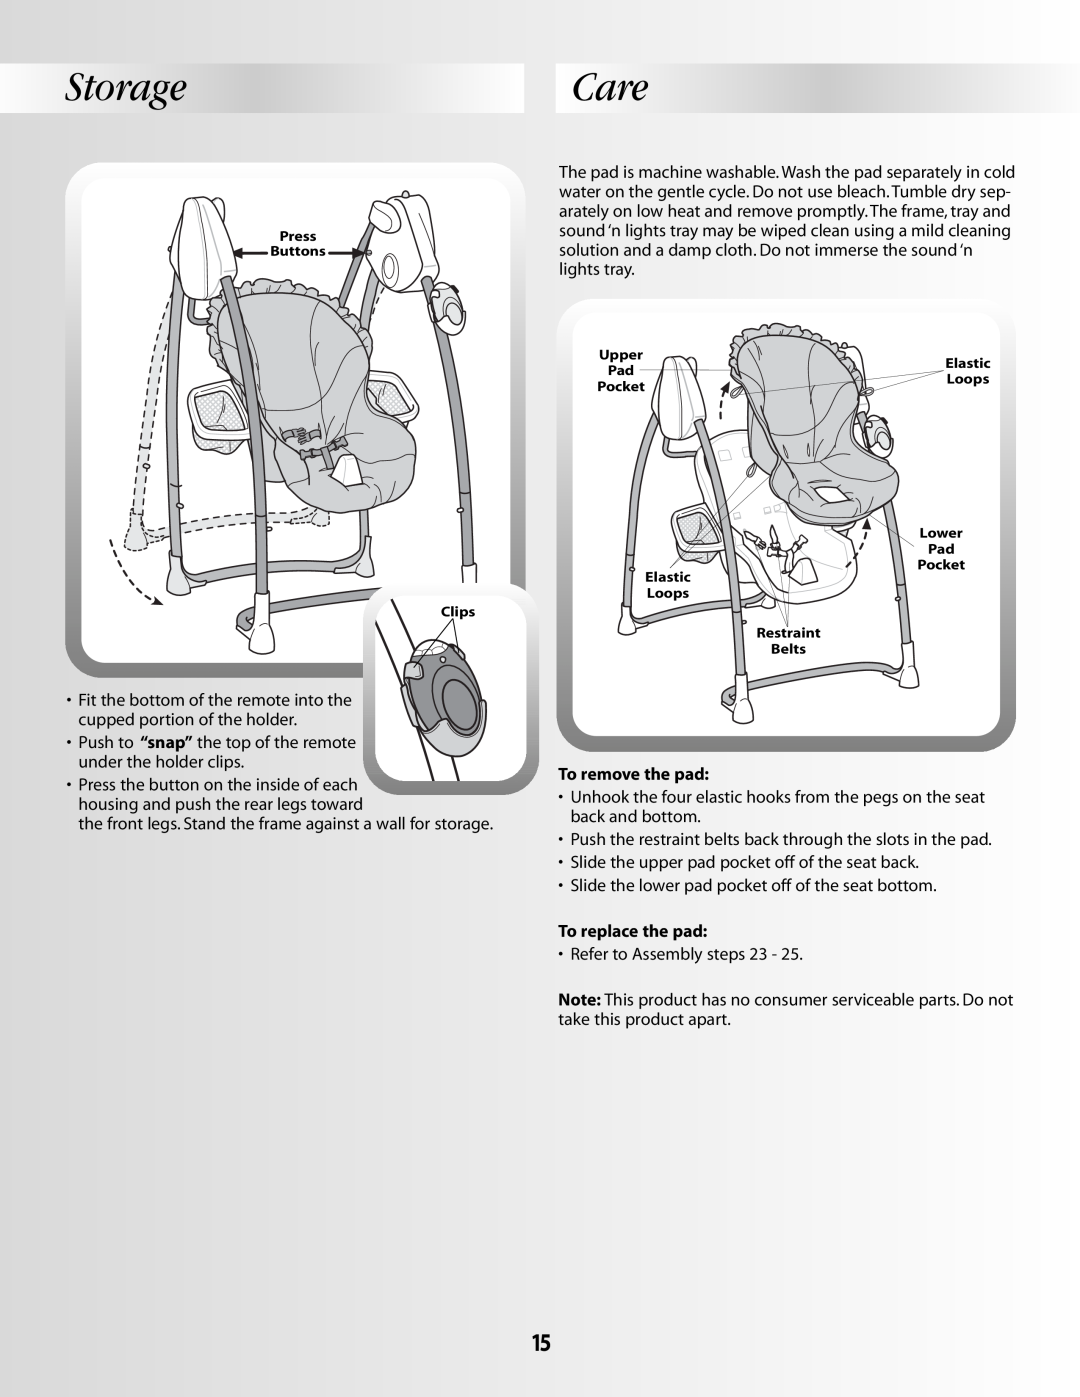 Fisher-Price B1637 manual StorageCare, To remove the pad, To replace the pad 